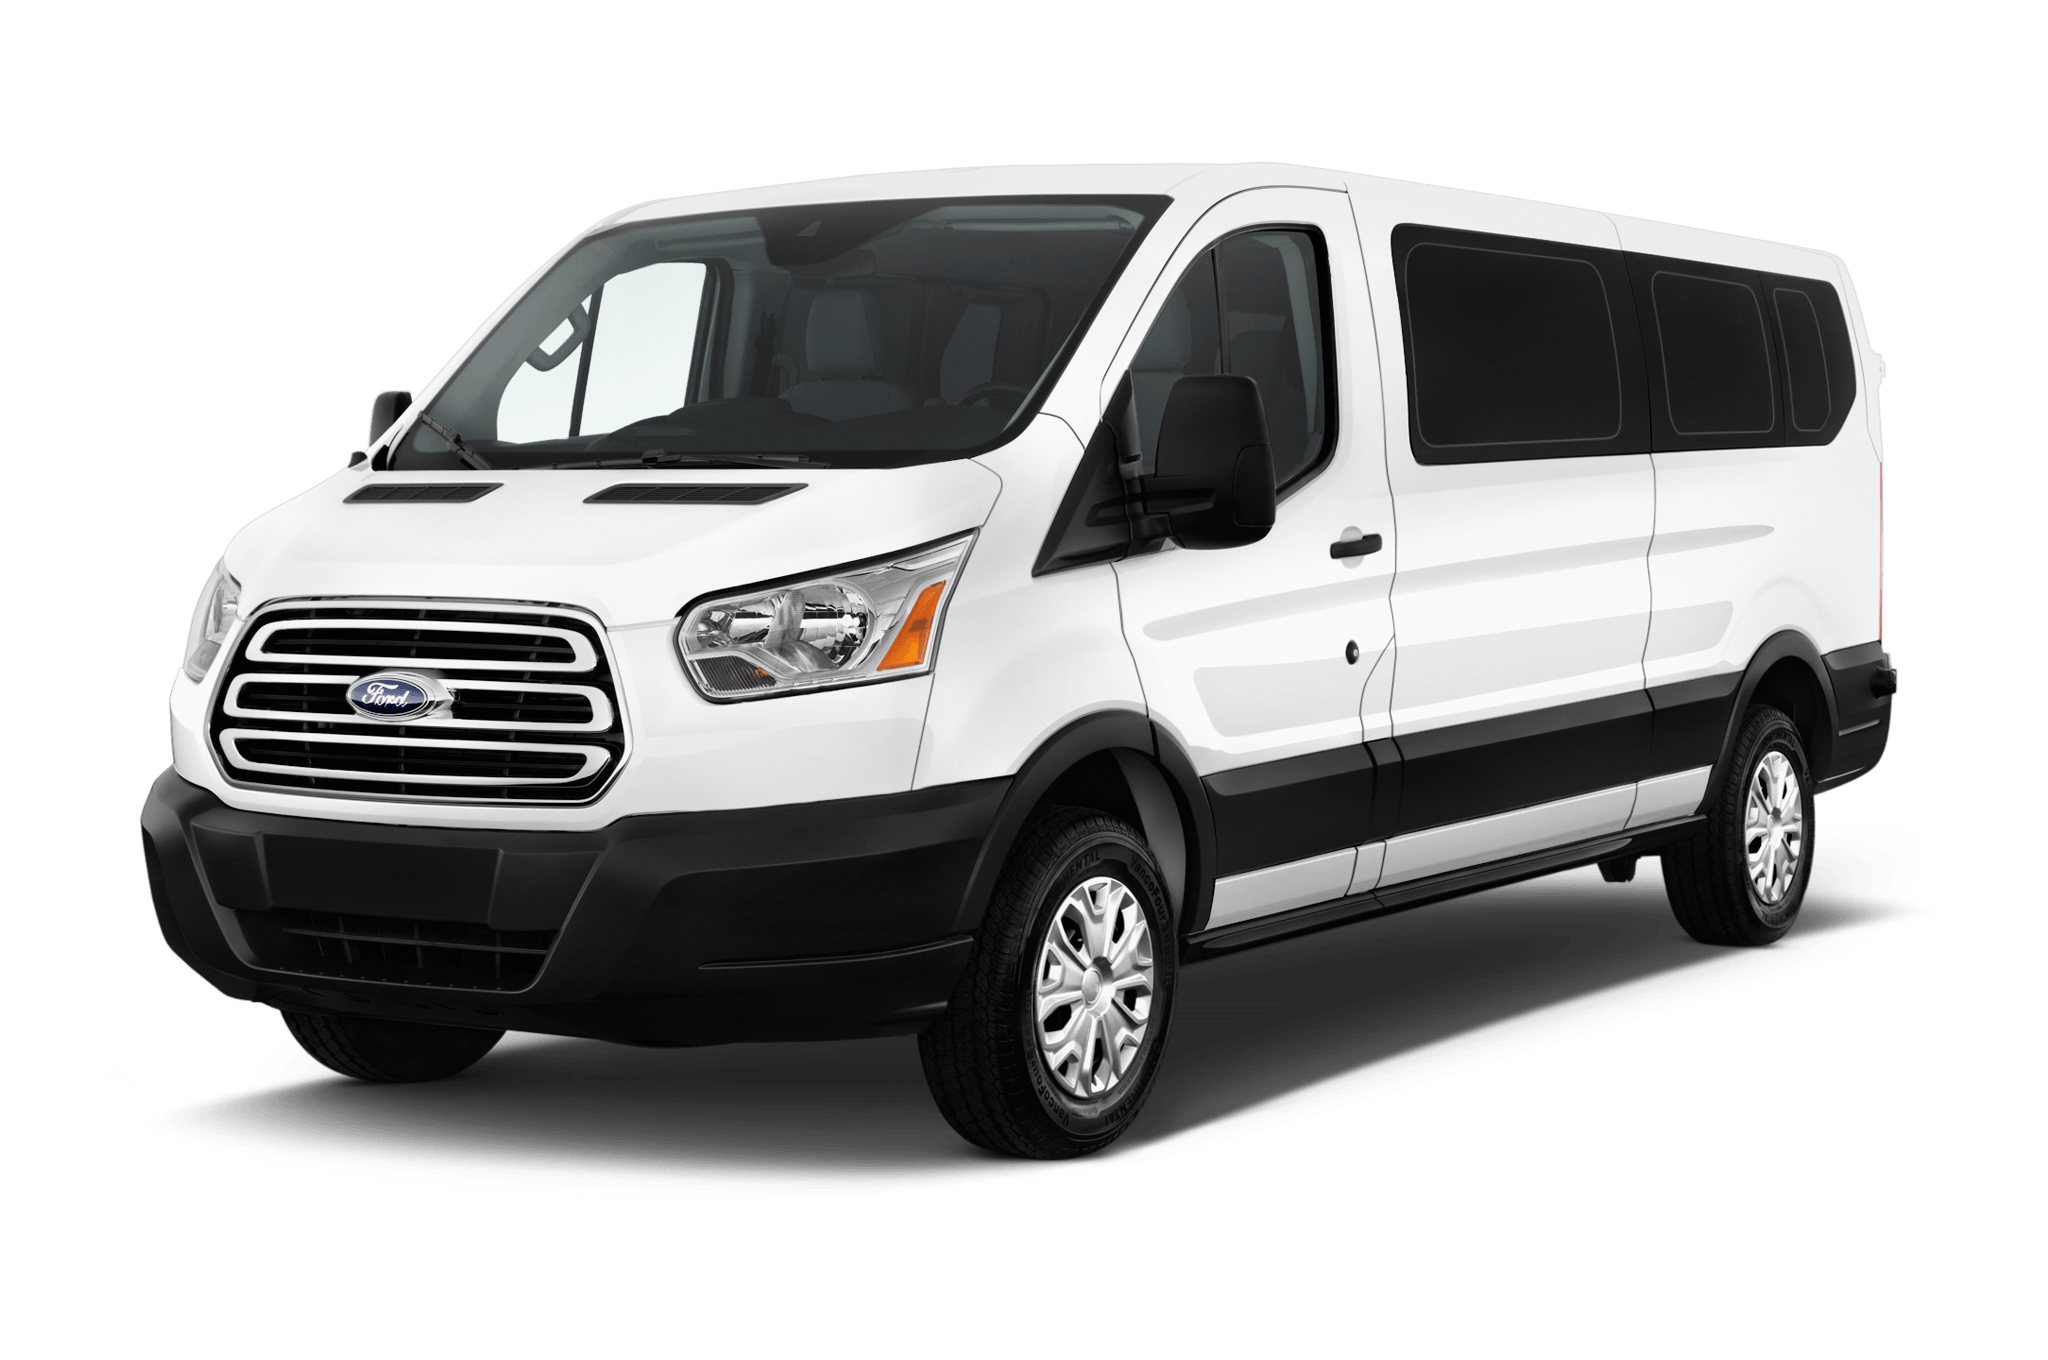 Ford Transit for hire at Just In Time Transportation Services